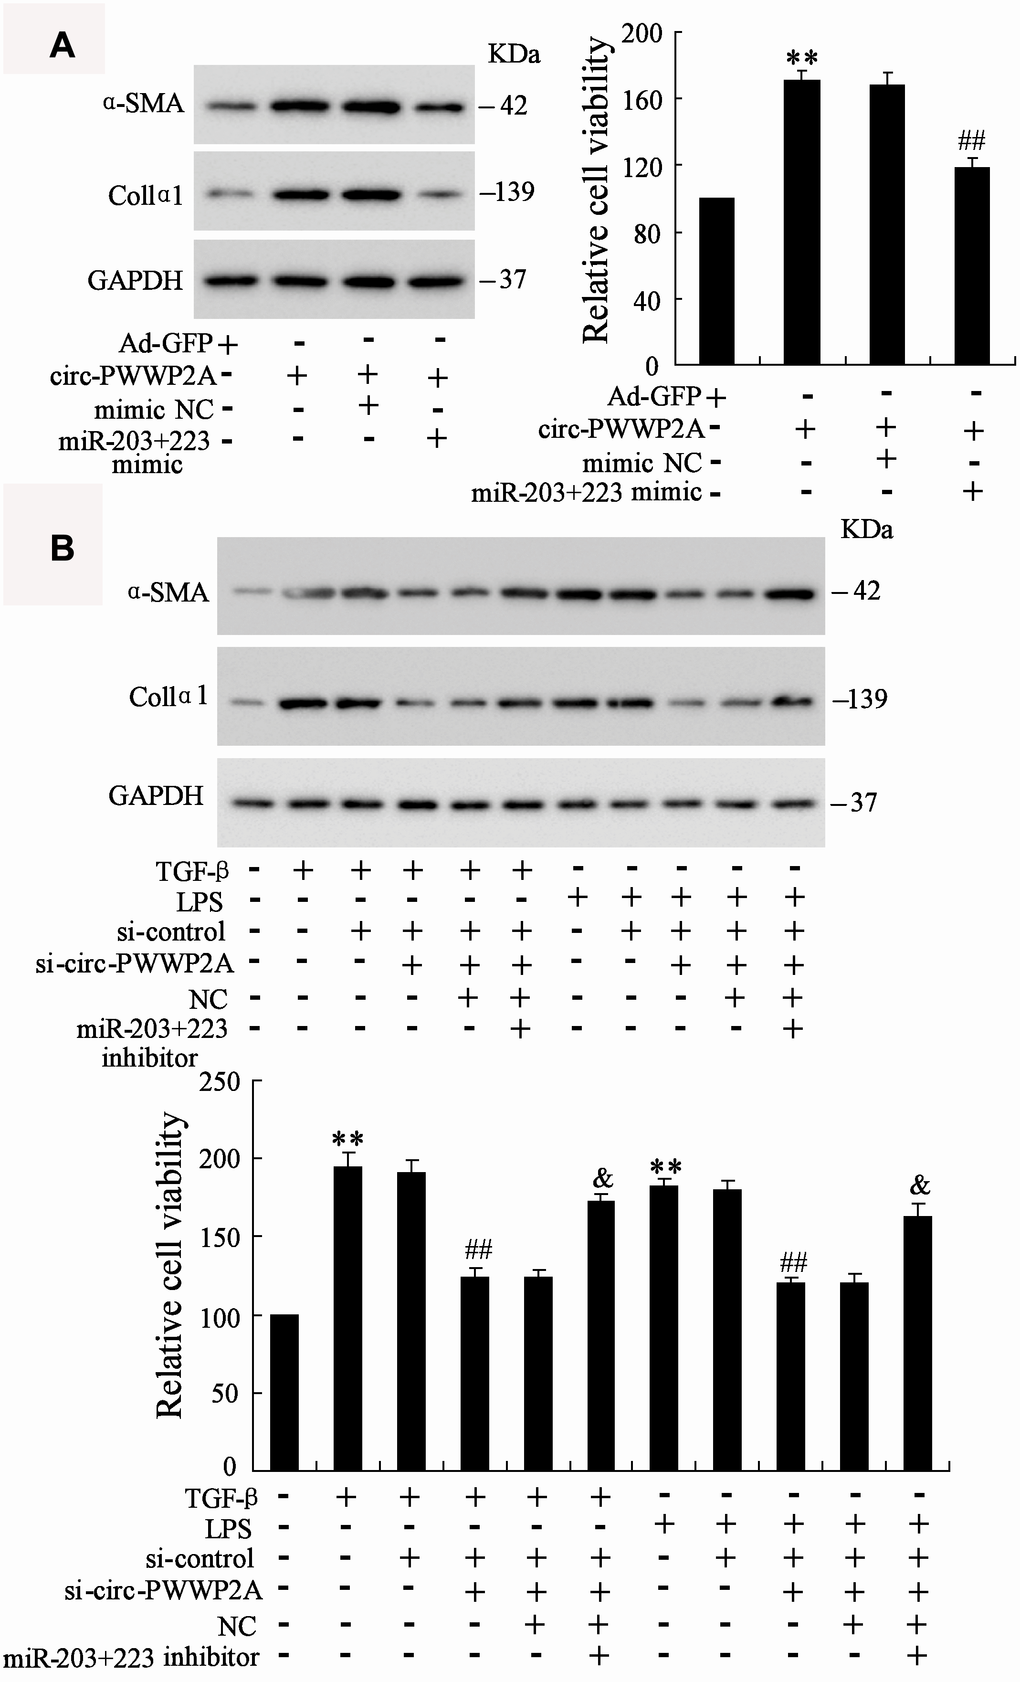 Circ-PWWP2A promotes activation and proliferation of HSCs via regulating miR-203 and miR-223. (A) LX-2 cells were transfected with Ad-circ-PWWP2A or co-transfected with miR-203+223 mimic. The protein expression of α-SMA and Col1α1 and cell viability were detected using western blot analysis and CCK-8 assay, respectively. (B) LX-2 cells were transfected with si-circ-PWWP2A or co-transfected with miR-203+223 inhibitor followed by TGF-β- or LPS-activation. The protein expression of α-SMA and Col1α1 and cell viability were detected. **p